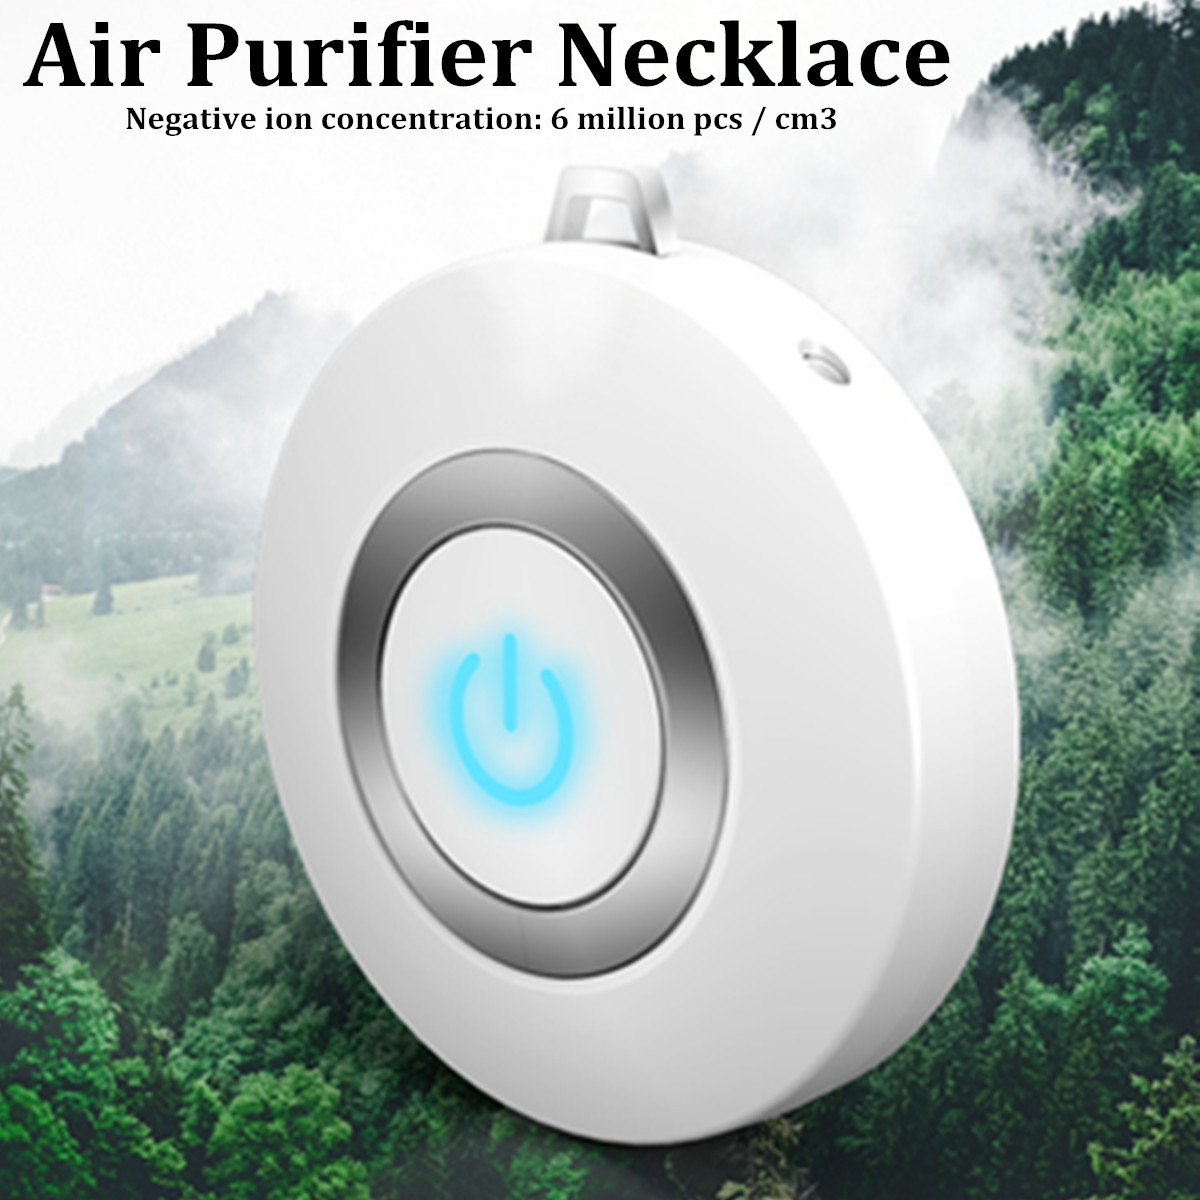 Wearable-Air-Purifier-Necklace-Ionizer-Ion-Generator-Odor-and-Smoke-Remover-1649109-2